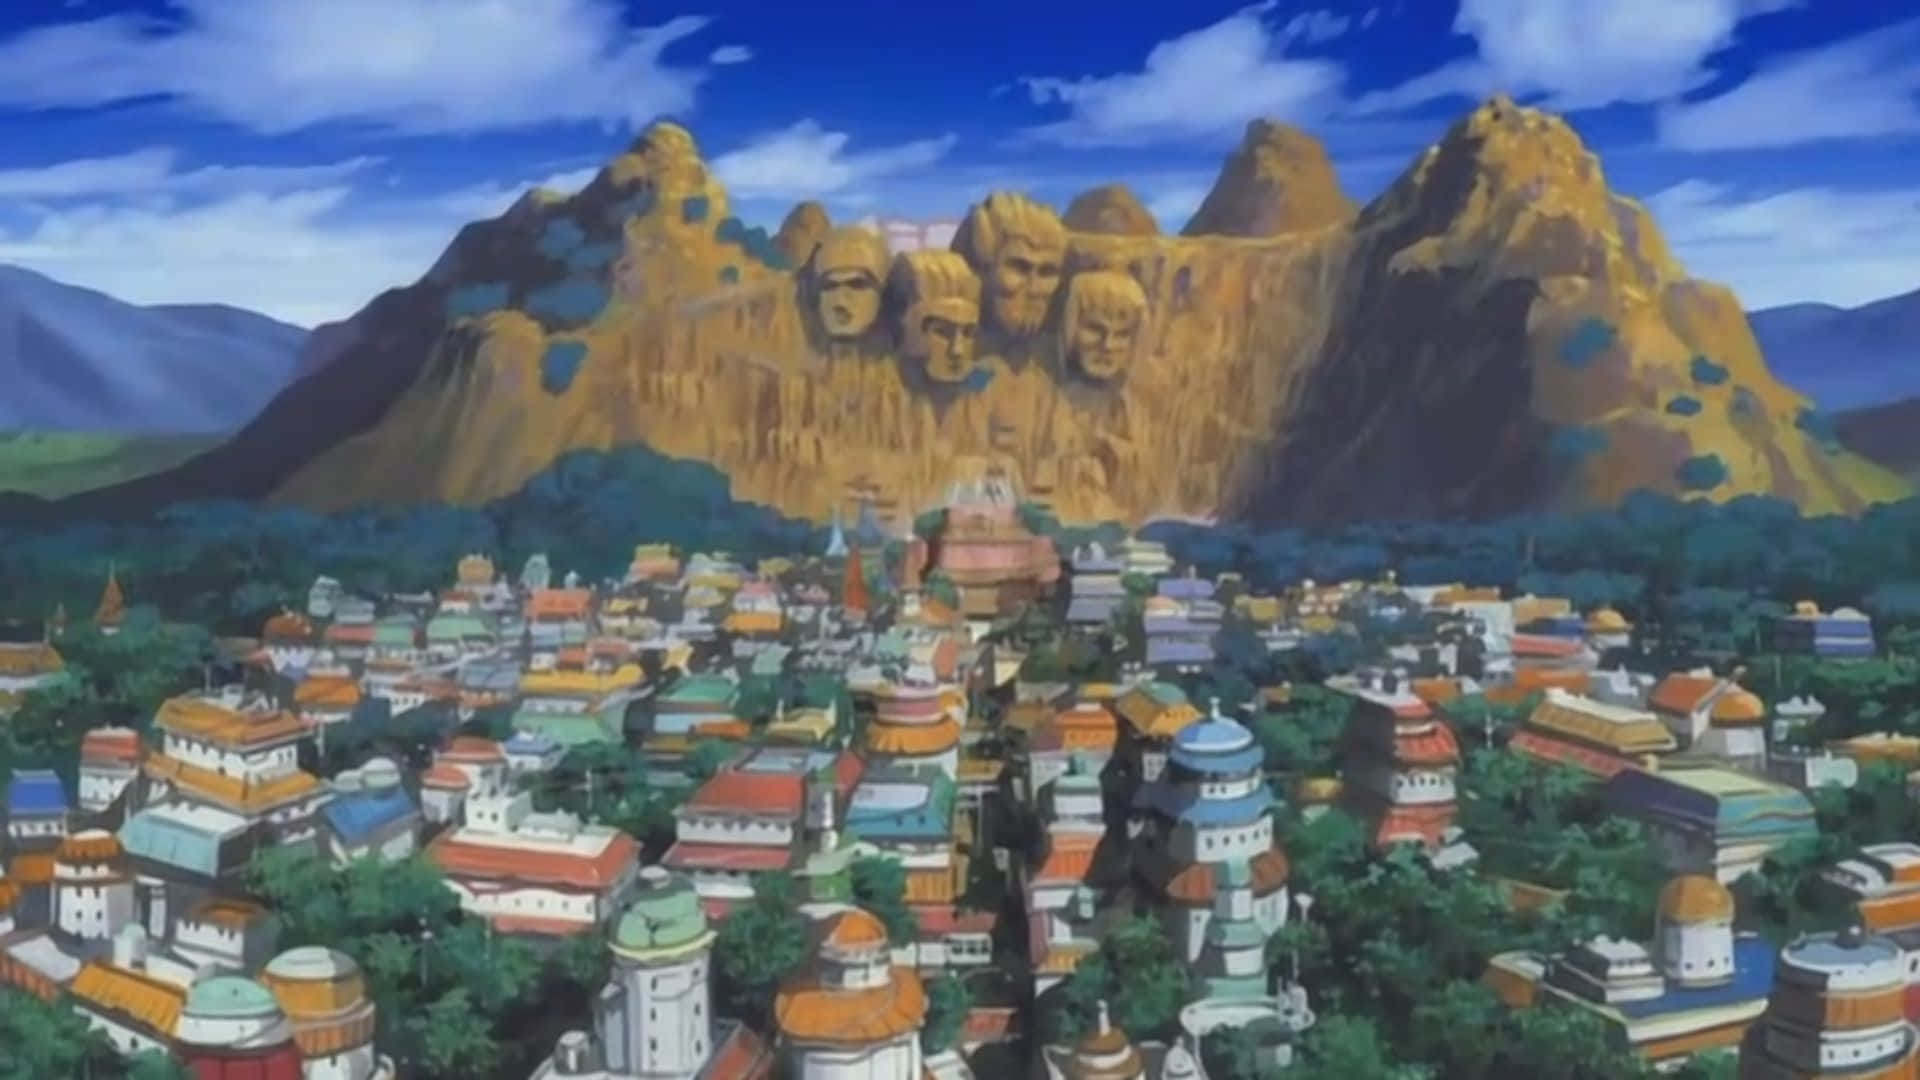 Welcome to Konoha - Location of the Leaf Village